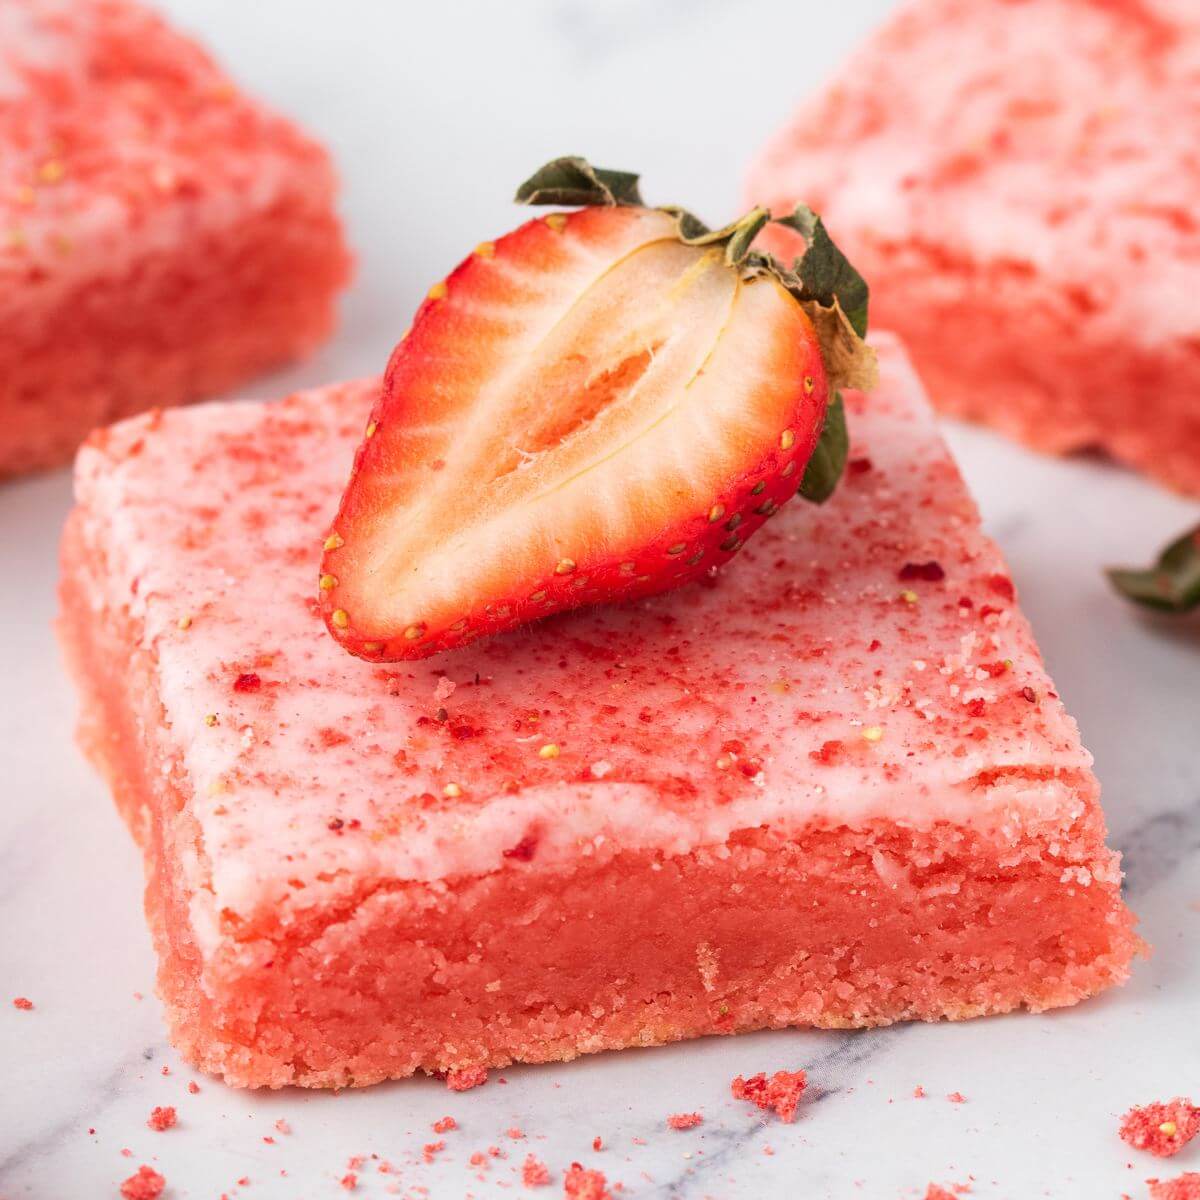 A strawberry rests on a pink baked square next to some crumbles.